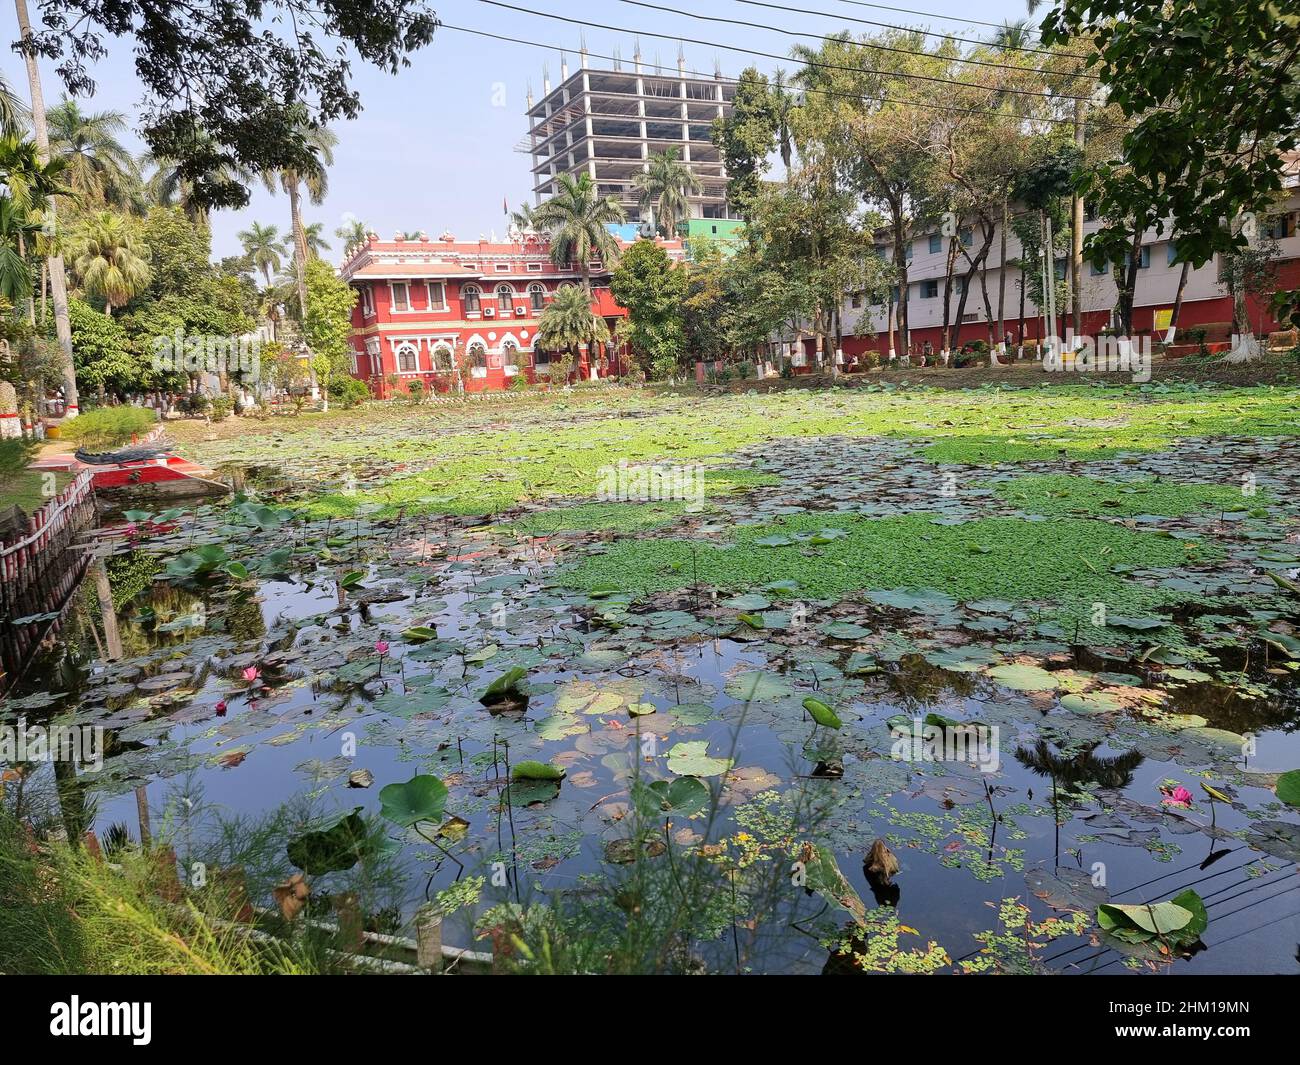 Shapla (water lily) pond on the premises of the Rajshahi College. Established in 1873 in Rajshahi city, it is the third oldest college in Bangladesh after Dhaka College and Chittagong College. In 1895, Rajshahi College was the first institution in the territories now comprising Bangladesh to award a graduate (master's) degree. The college is affiliated with the National University. Situated in the city center, Rajshahi College is adjacent to Rajshahi Collegiate School and is very near the famous Barendra Museum. Bangladesh. Stock Photo